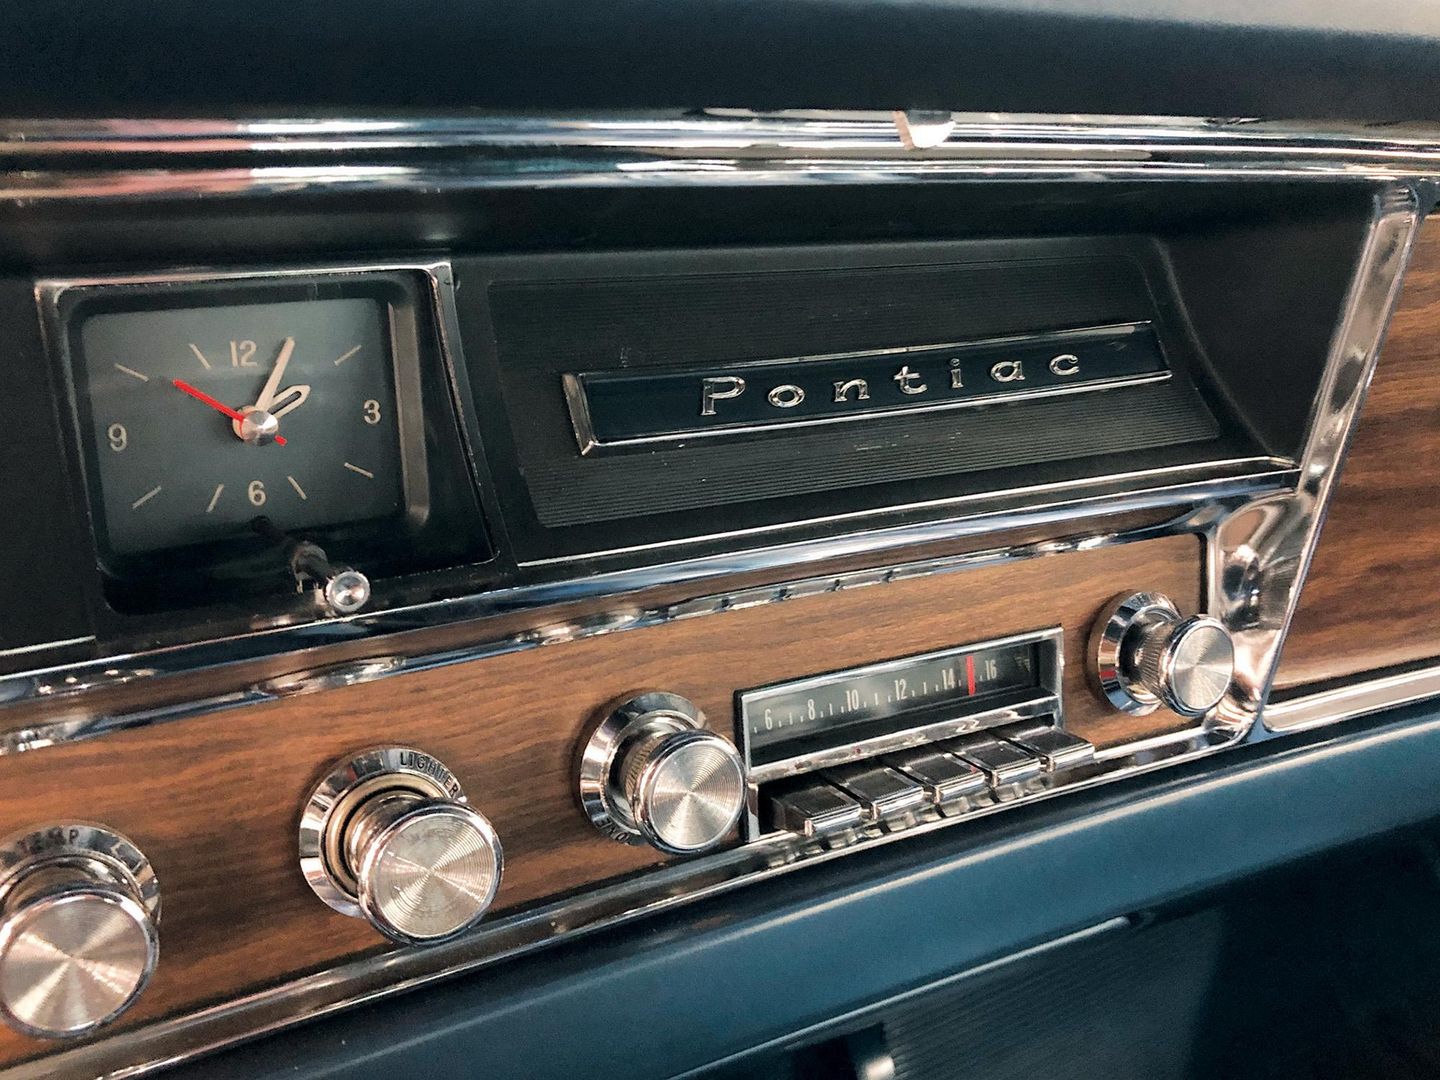 Color closeup of the radio, stereo, knobs and more inside of a 1967 Pontiac Catalina 2+2.